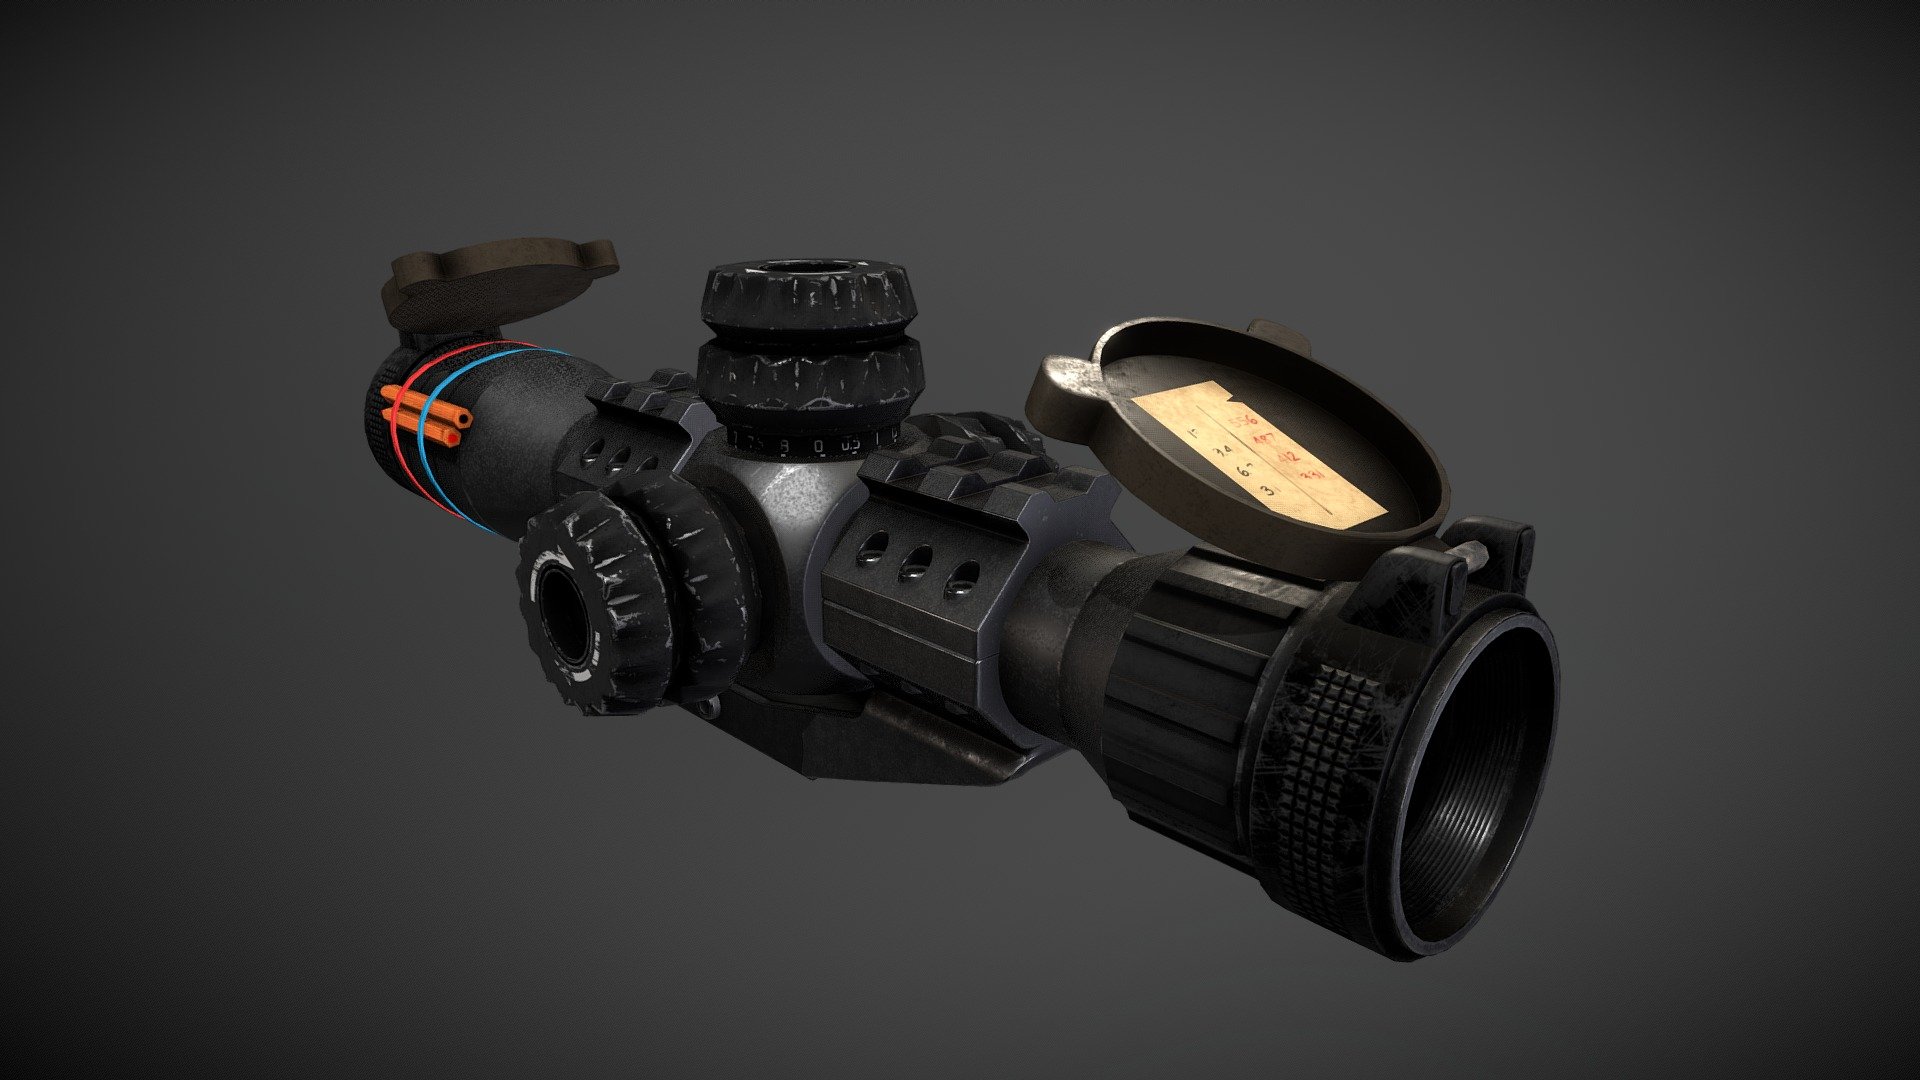 Hard Surface study, Scope Model ~ 9.7k triangles. 
Base meshes made in 3DS Max, PBR textures created in Substance &amp; Photoshop.
4096x4096 Albedo, AO, Roughness, Metallic and Normal textures 3d model